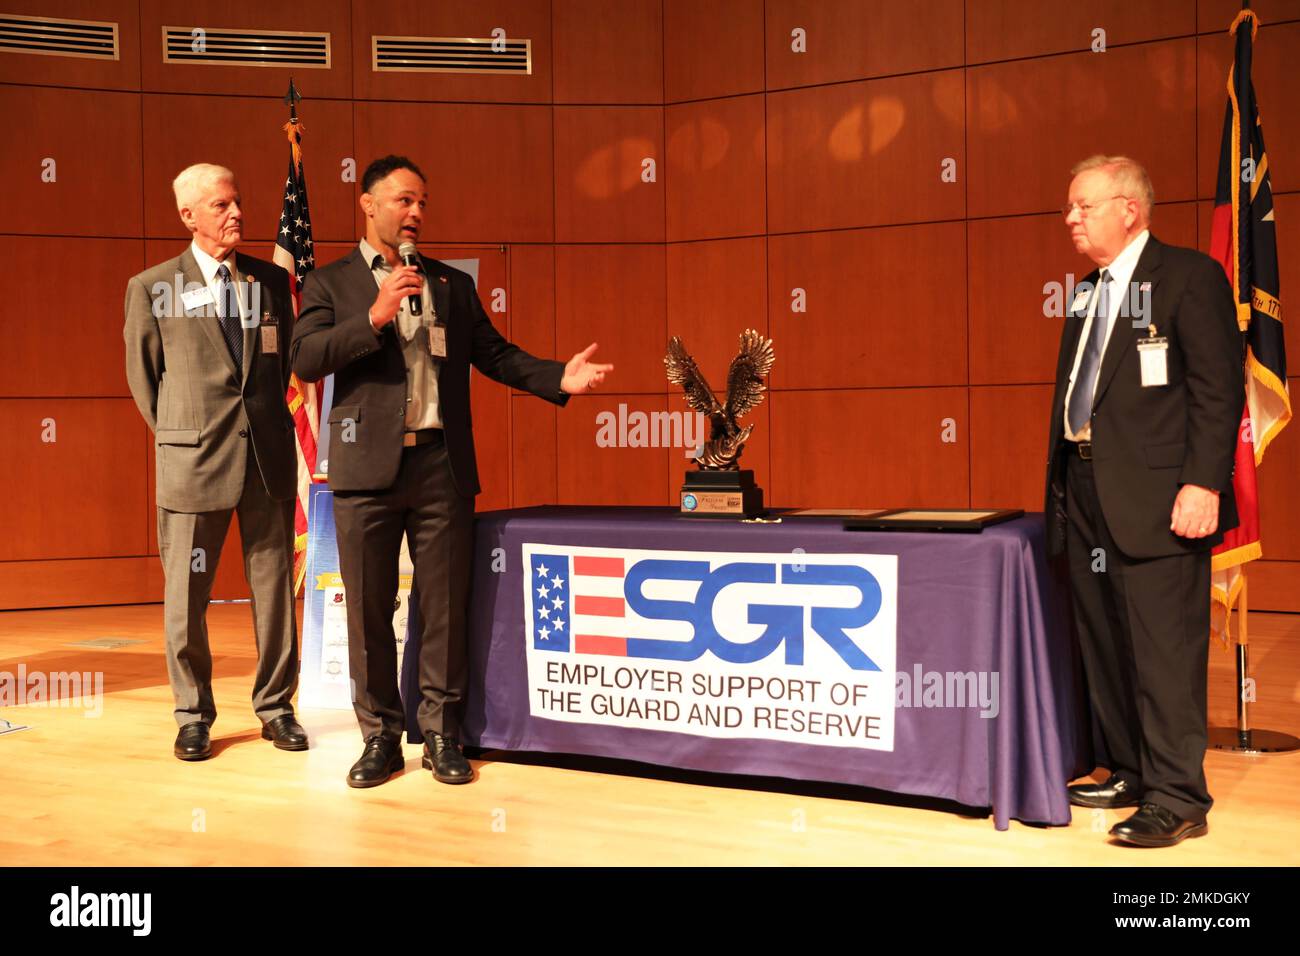 Josh Koshcheck (Center left), Chief Executive Officer of Check Defense and recipient of the Secretary of Defense Freedom Award, thanks Ron Bogle (far right), Employer Support of the Guard and Reserve National Chairman, and Ed Hamilton (far left), NC-ESGR Vice Chairman, during a ceremony at the North Carolina National Guard's Joint Forces Headquarter, Raleigh, North Carolina, Sept. 8, 2022. The Freedom Award is the highest recognition given by the United States Government to employers for their outstanding support of employees serving in the Guard and Reserve. Stock Photo